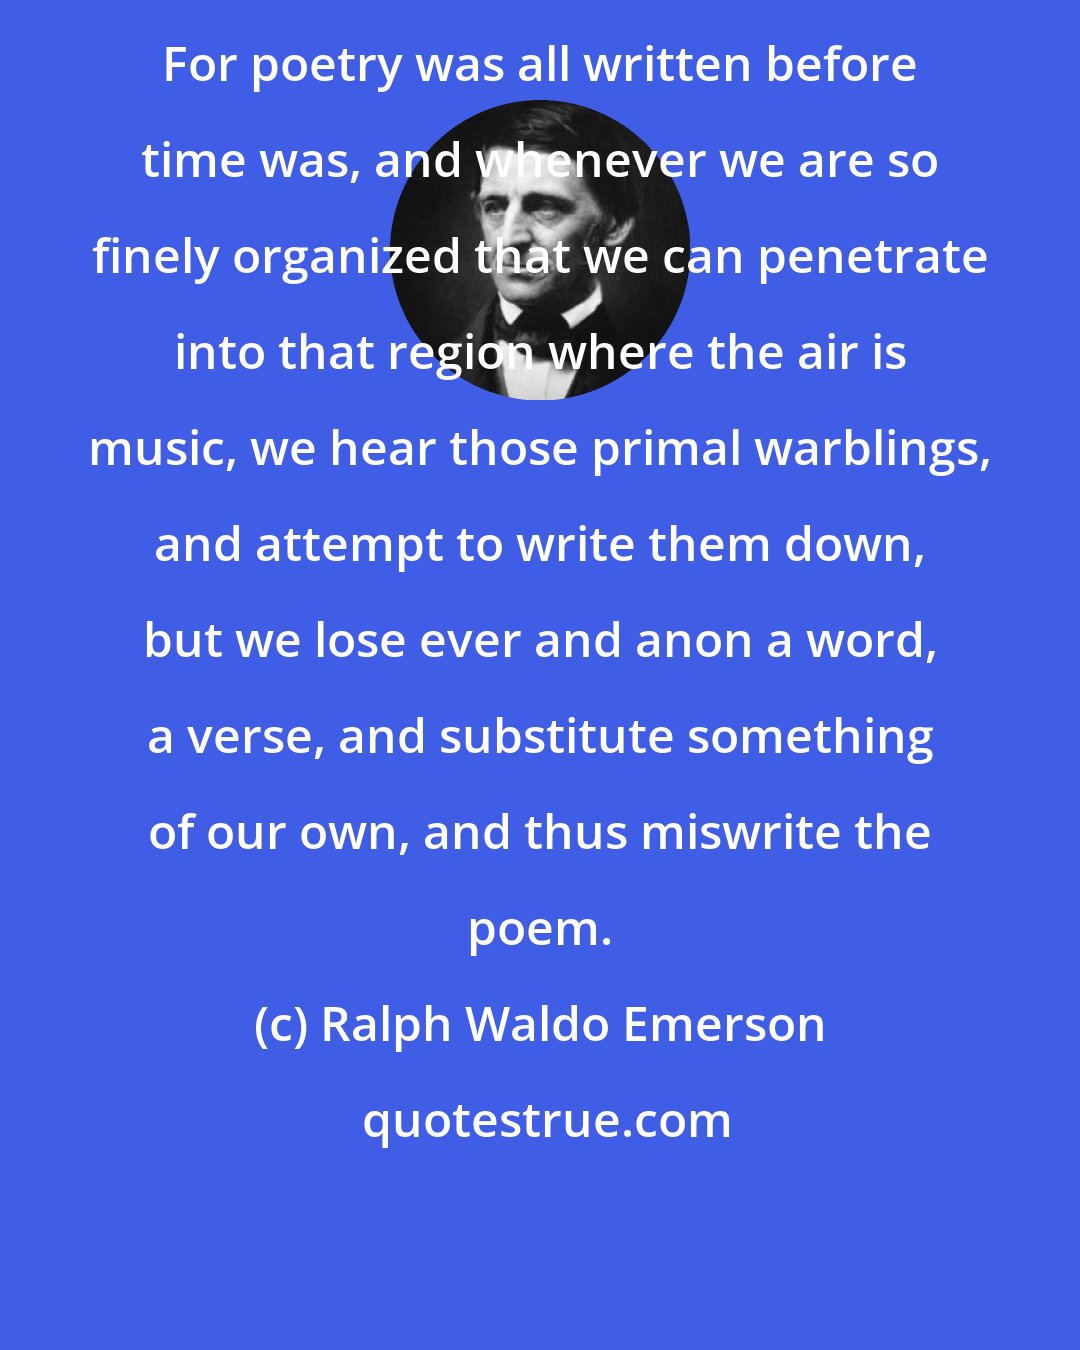 Ralph Waldo Emerson: For poetry was all written before time was, and whenever we are so finely organized that we can penetrate into that region where the air is music, we hear those primal warblings, and attempt to write them down, but we lose ever and anon a word, a verse, and substitute something of our own, and thus miswrite the poem.